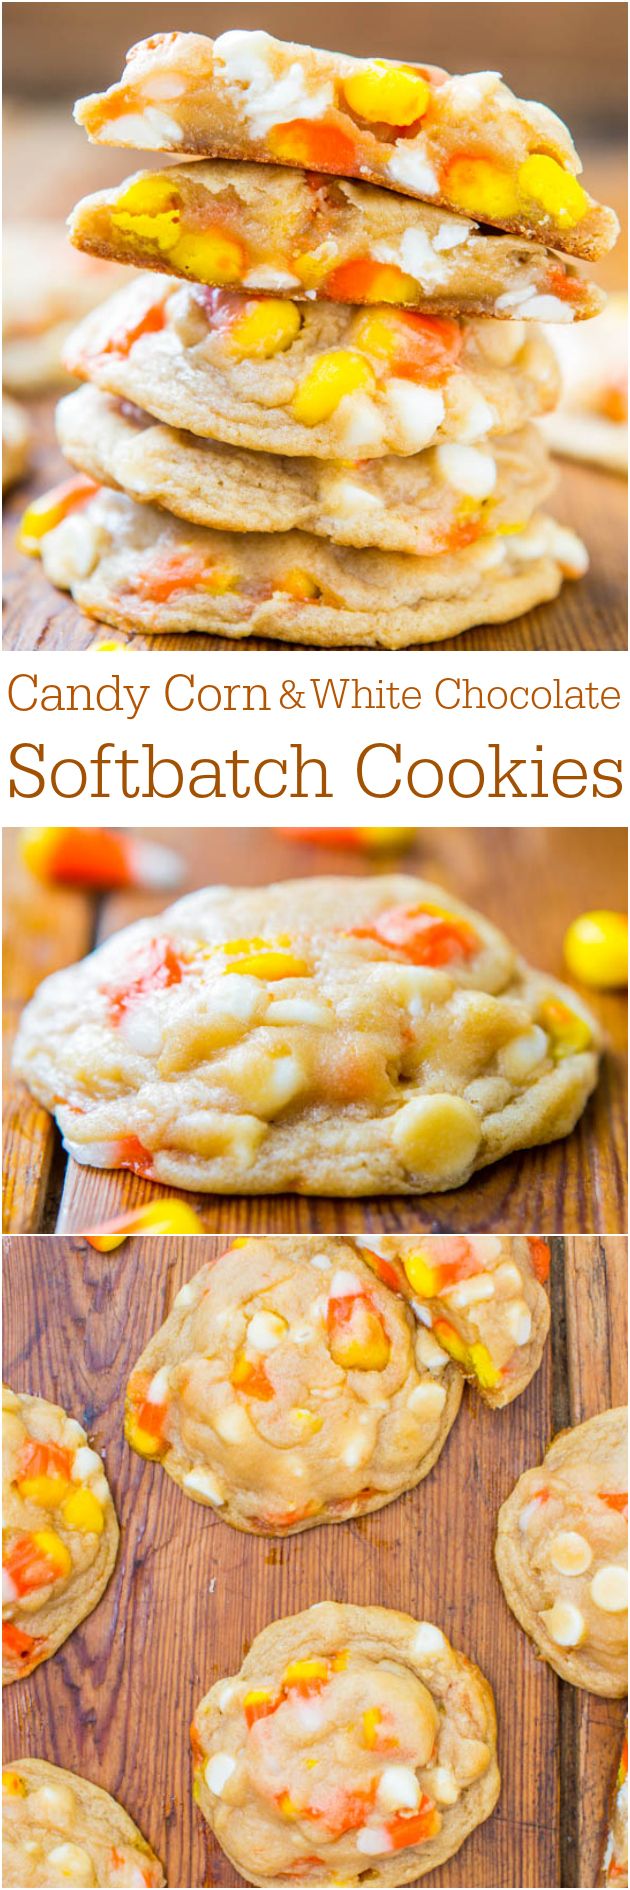 candy corn cookies. Sorry to all my dieting friends Pinterest feeds!